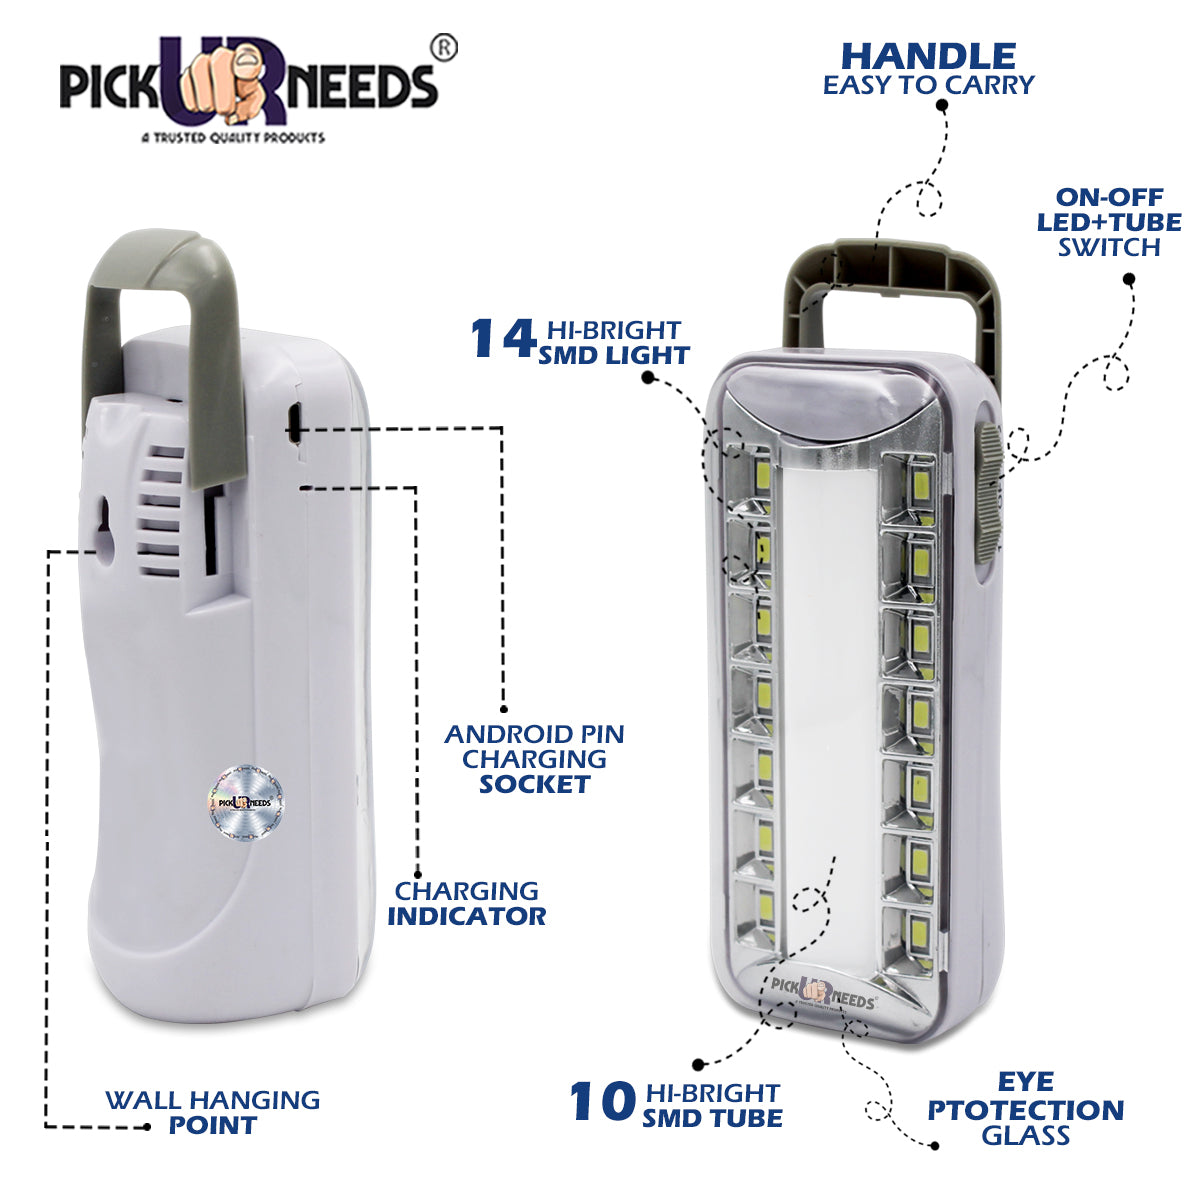 Pick Ur Needs 2 In 1 Rechargeable 14 SMD + Tube LED With 4 hrs Lantern Emergency Light(TUBE+SMD)